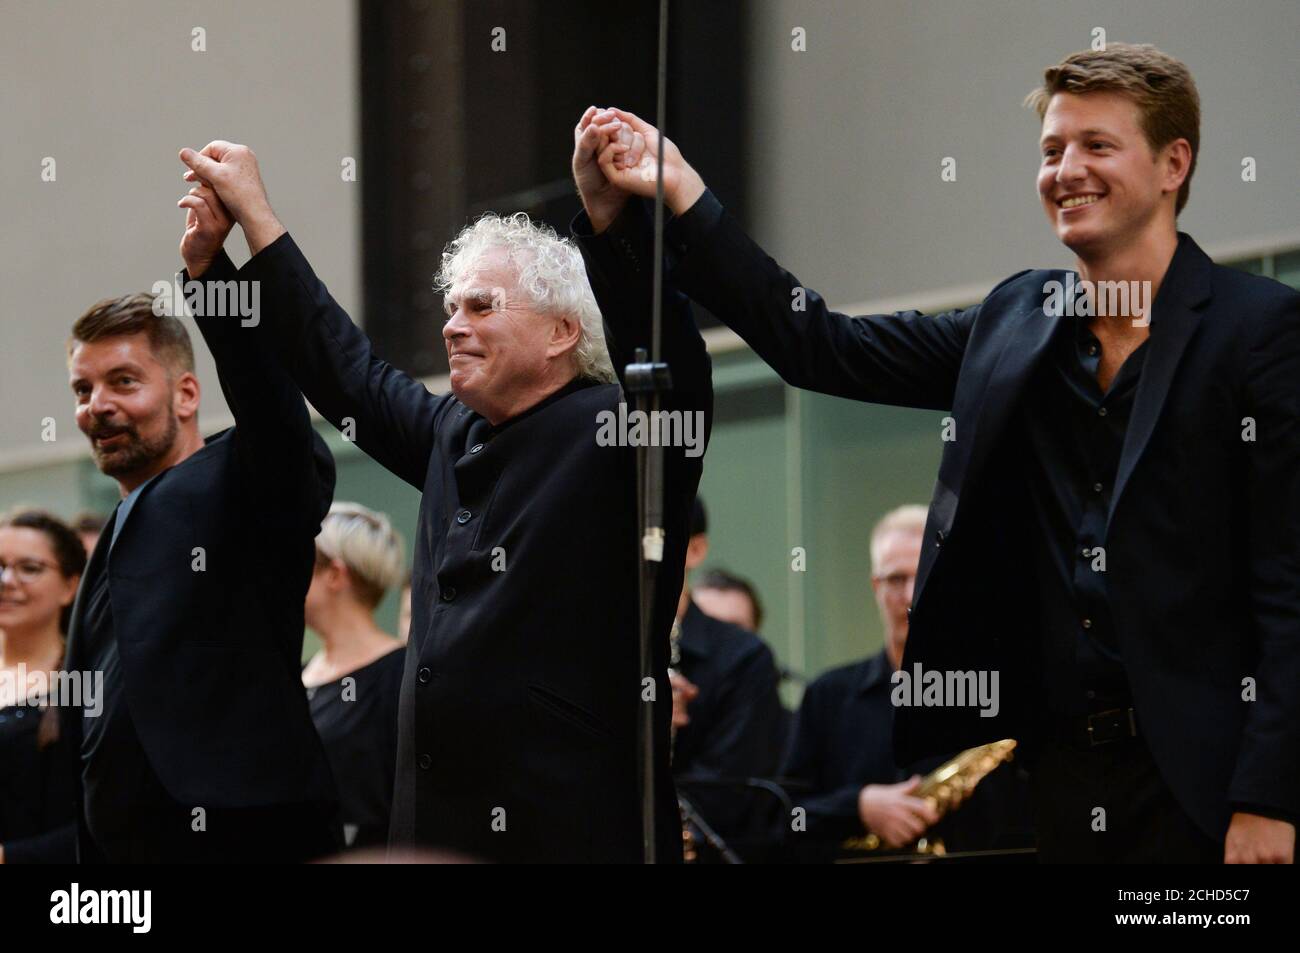 (left to right) Matthias Pintscher, Sir Simon Rattle and Duncan Ward after they conducted the London Symphony Orchestra perform Stockhausen's Gruppen for three Orchestras in Tate Modern's Turbine Hall, London. Stock Photo